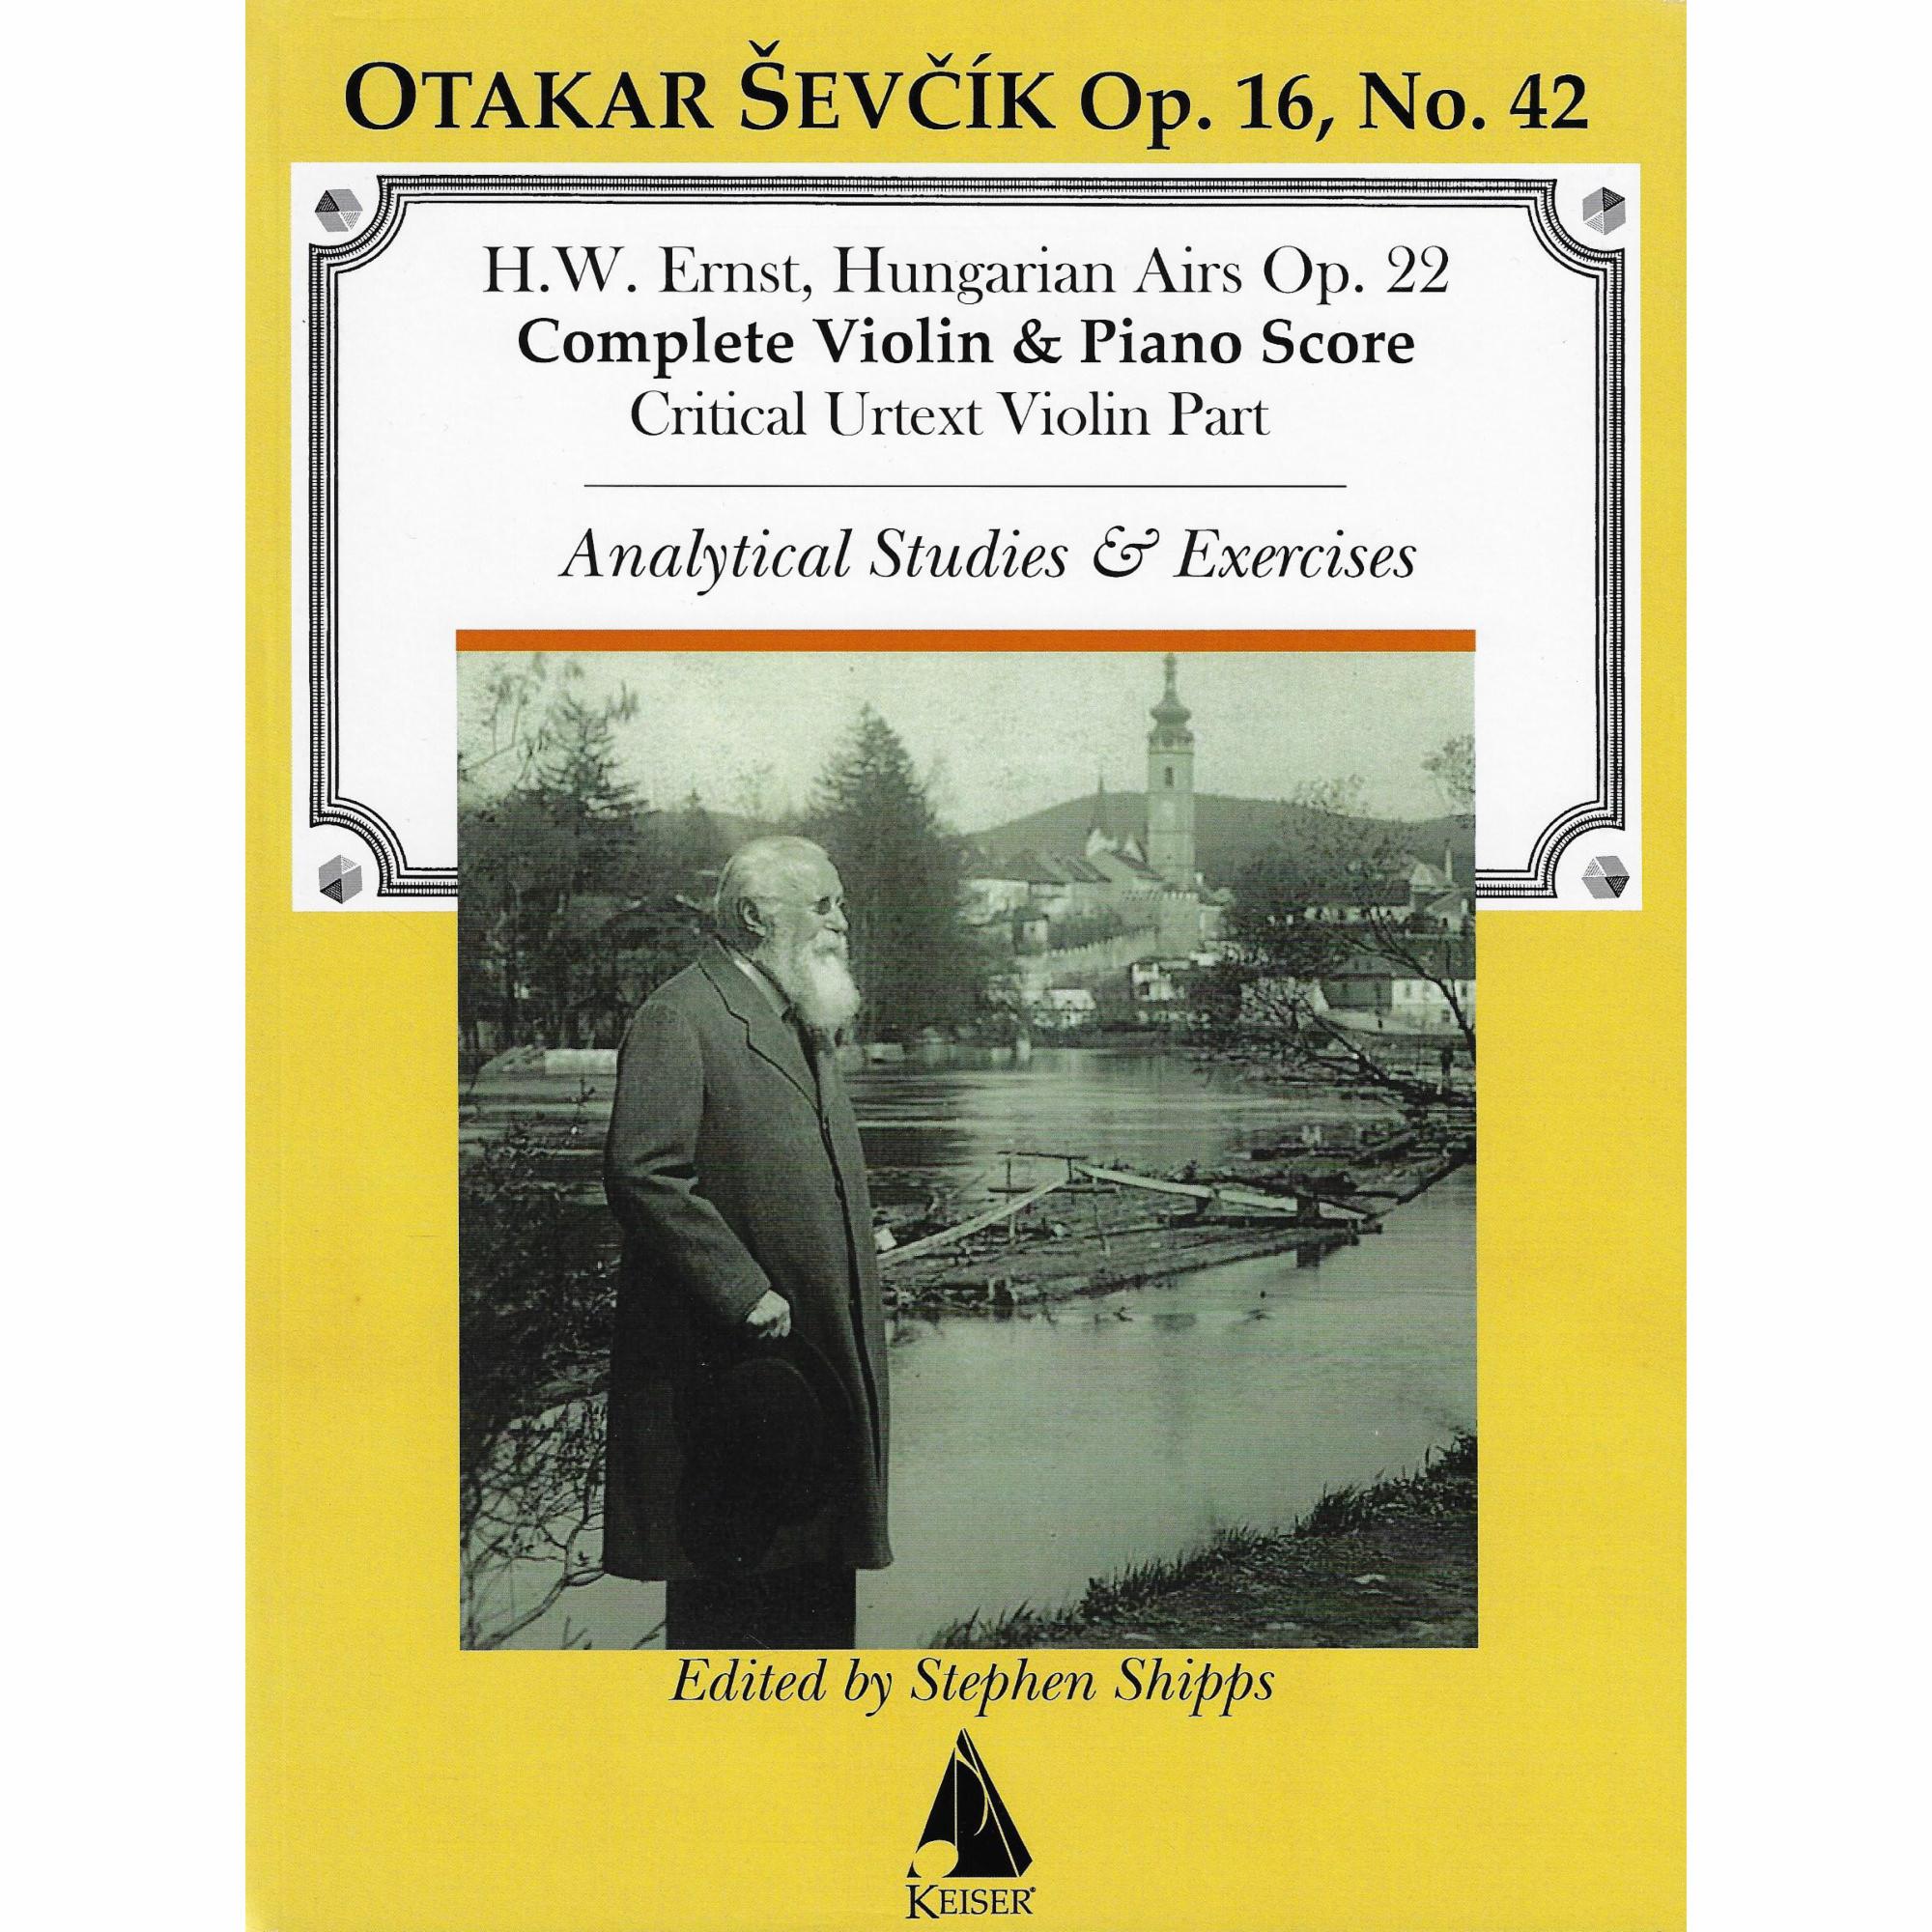 Sevcik -- Analytical Studies & Exercises, Op. 16, No. 42 (after Ernst Hungarian Airs)